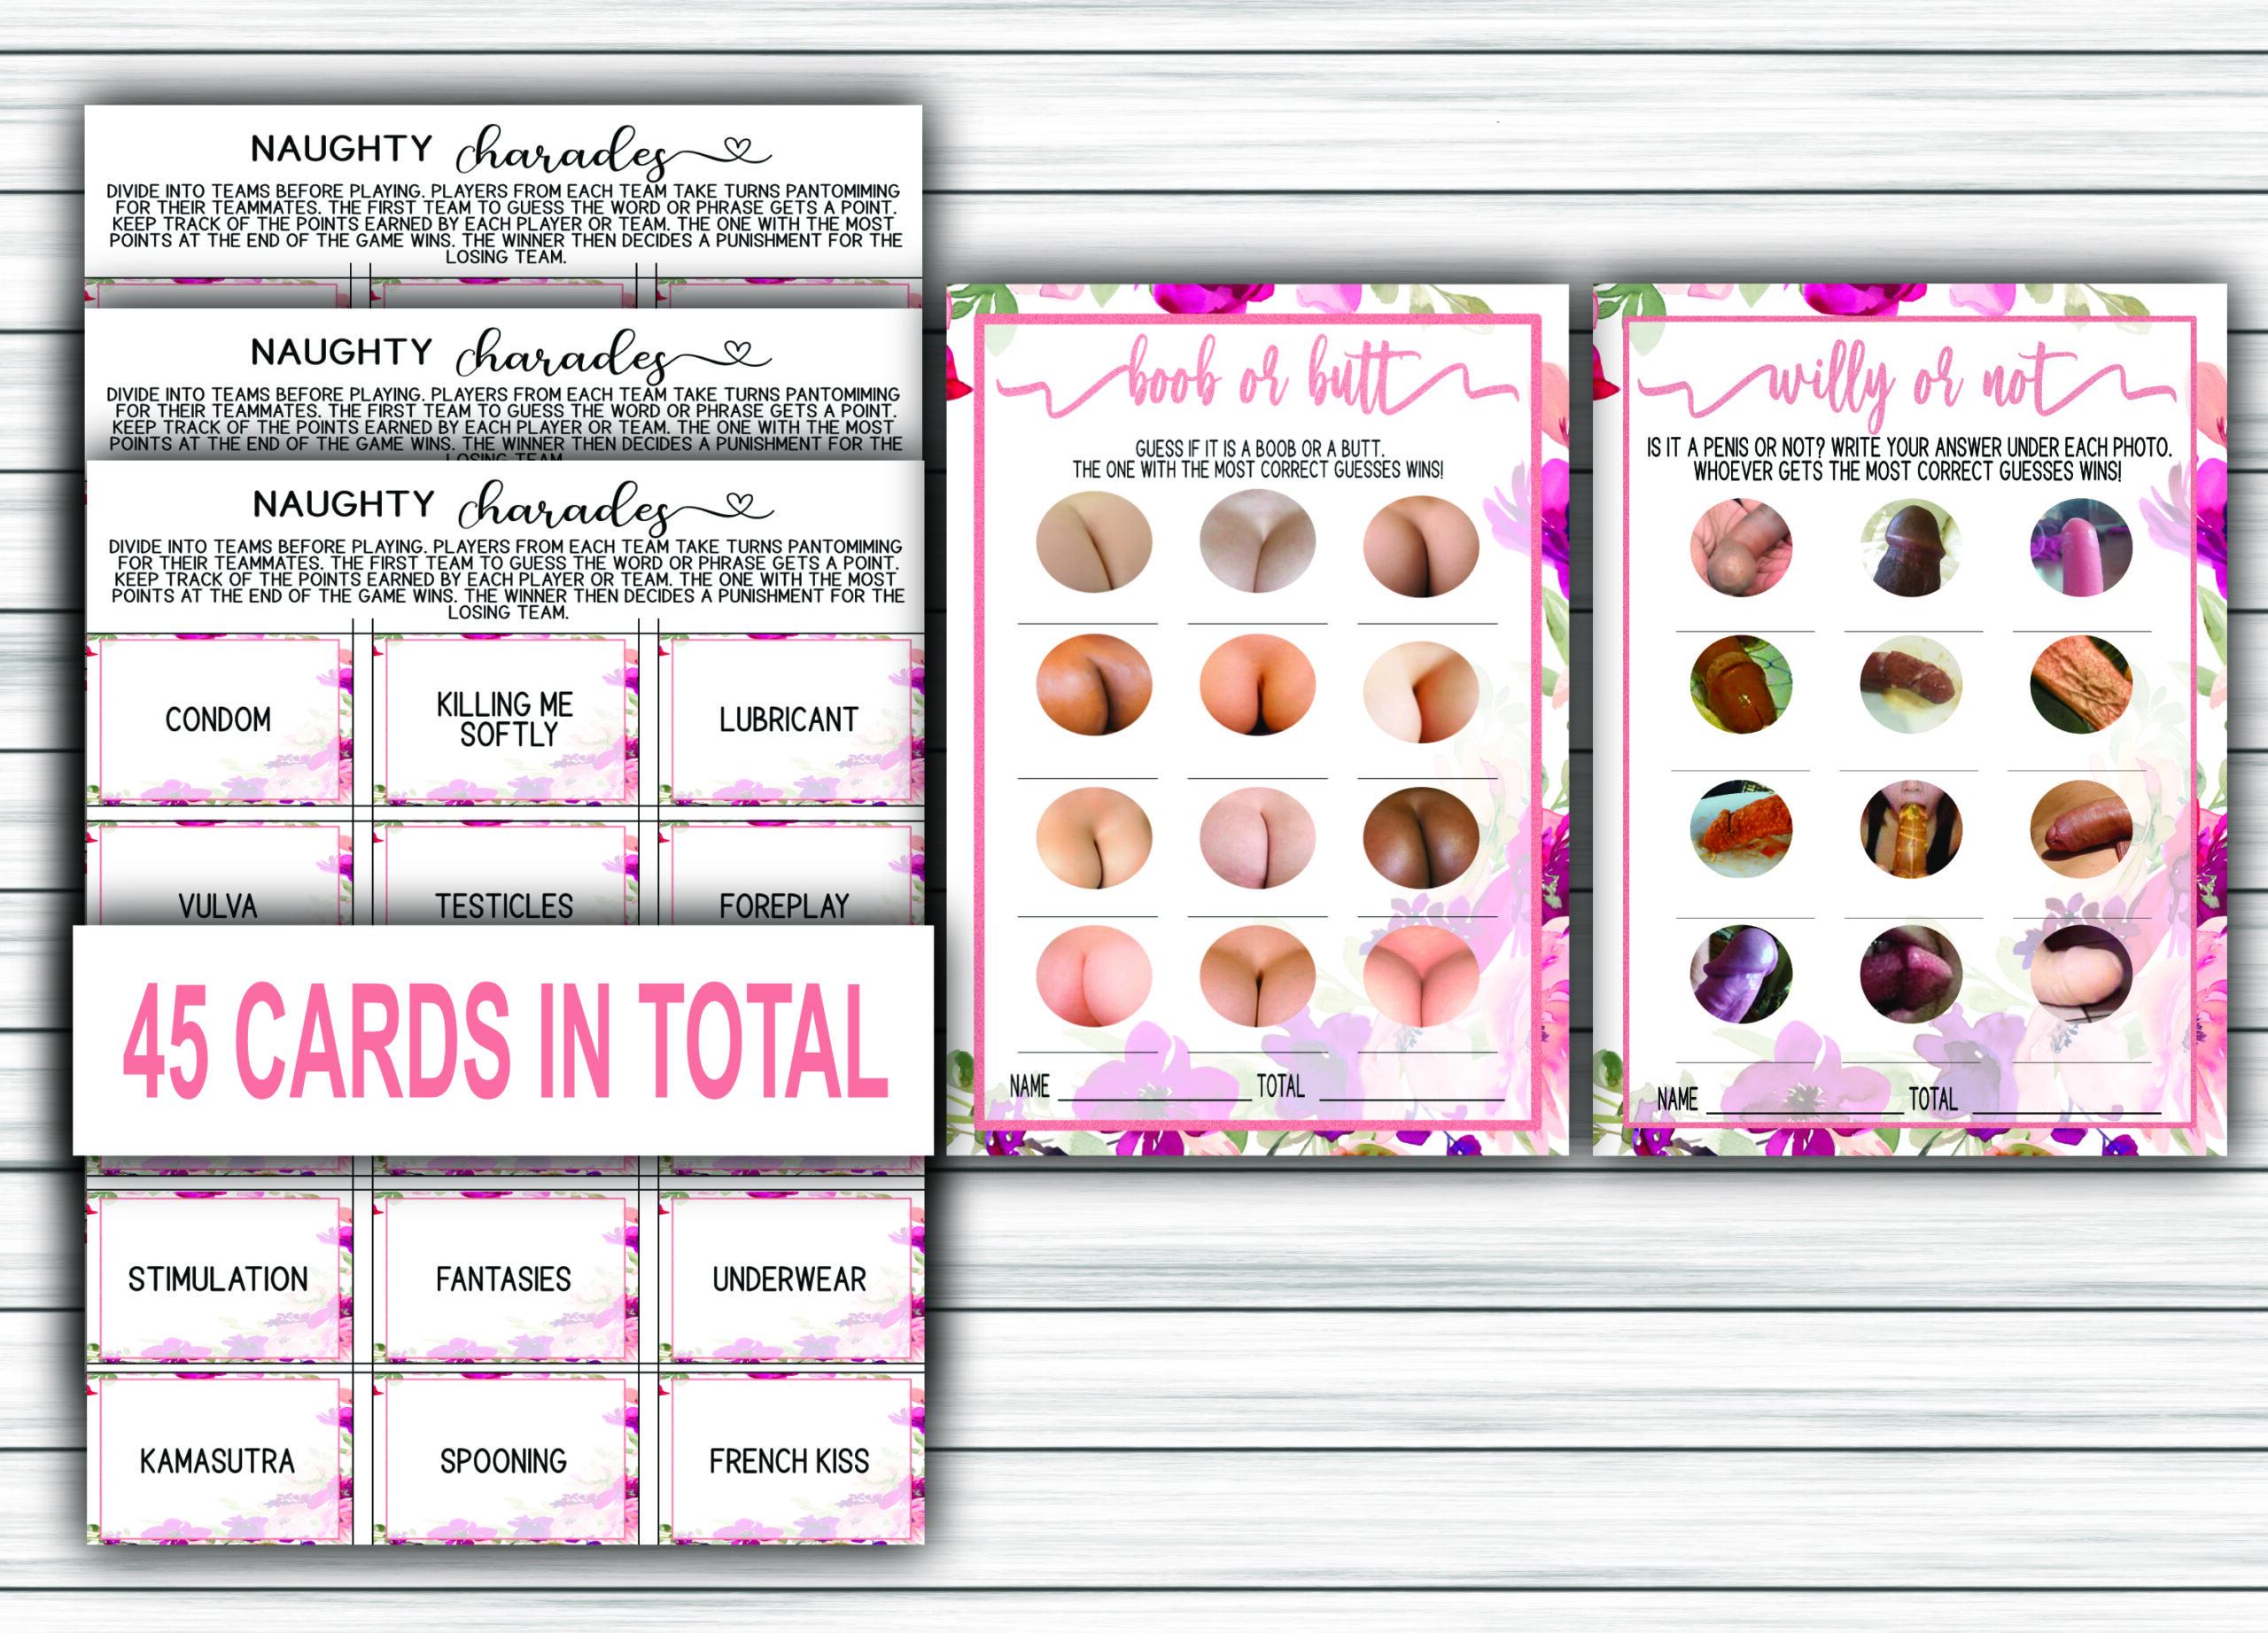 BACHELORETTE GAMES 9-1 DIRTY ADULT GAME BUNDLE Bachelorette Party Games Pack